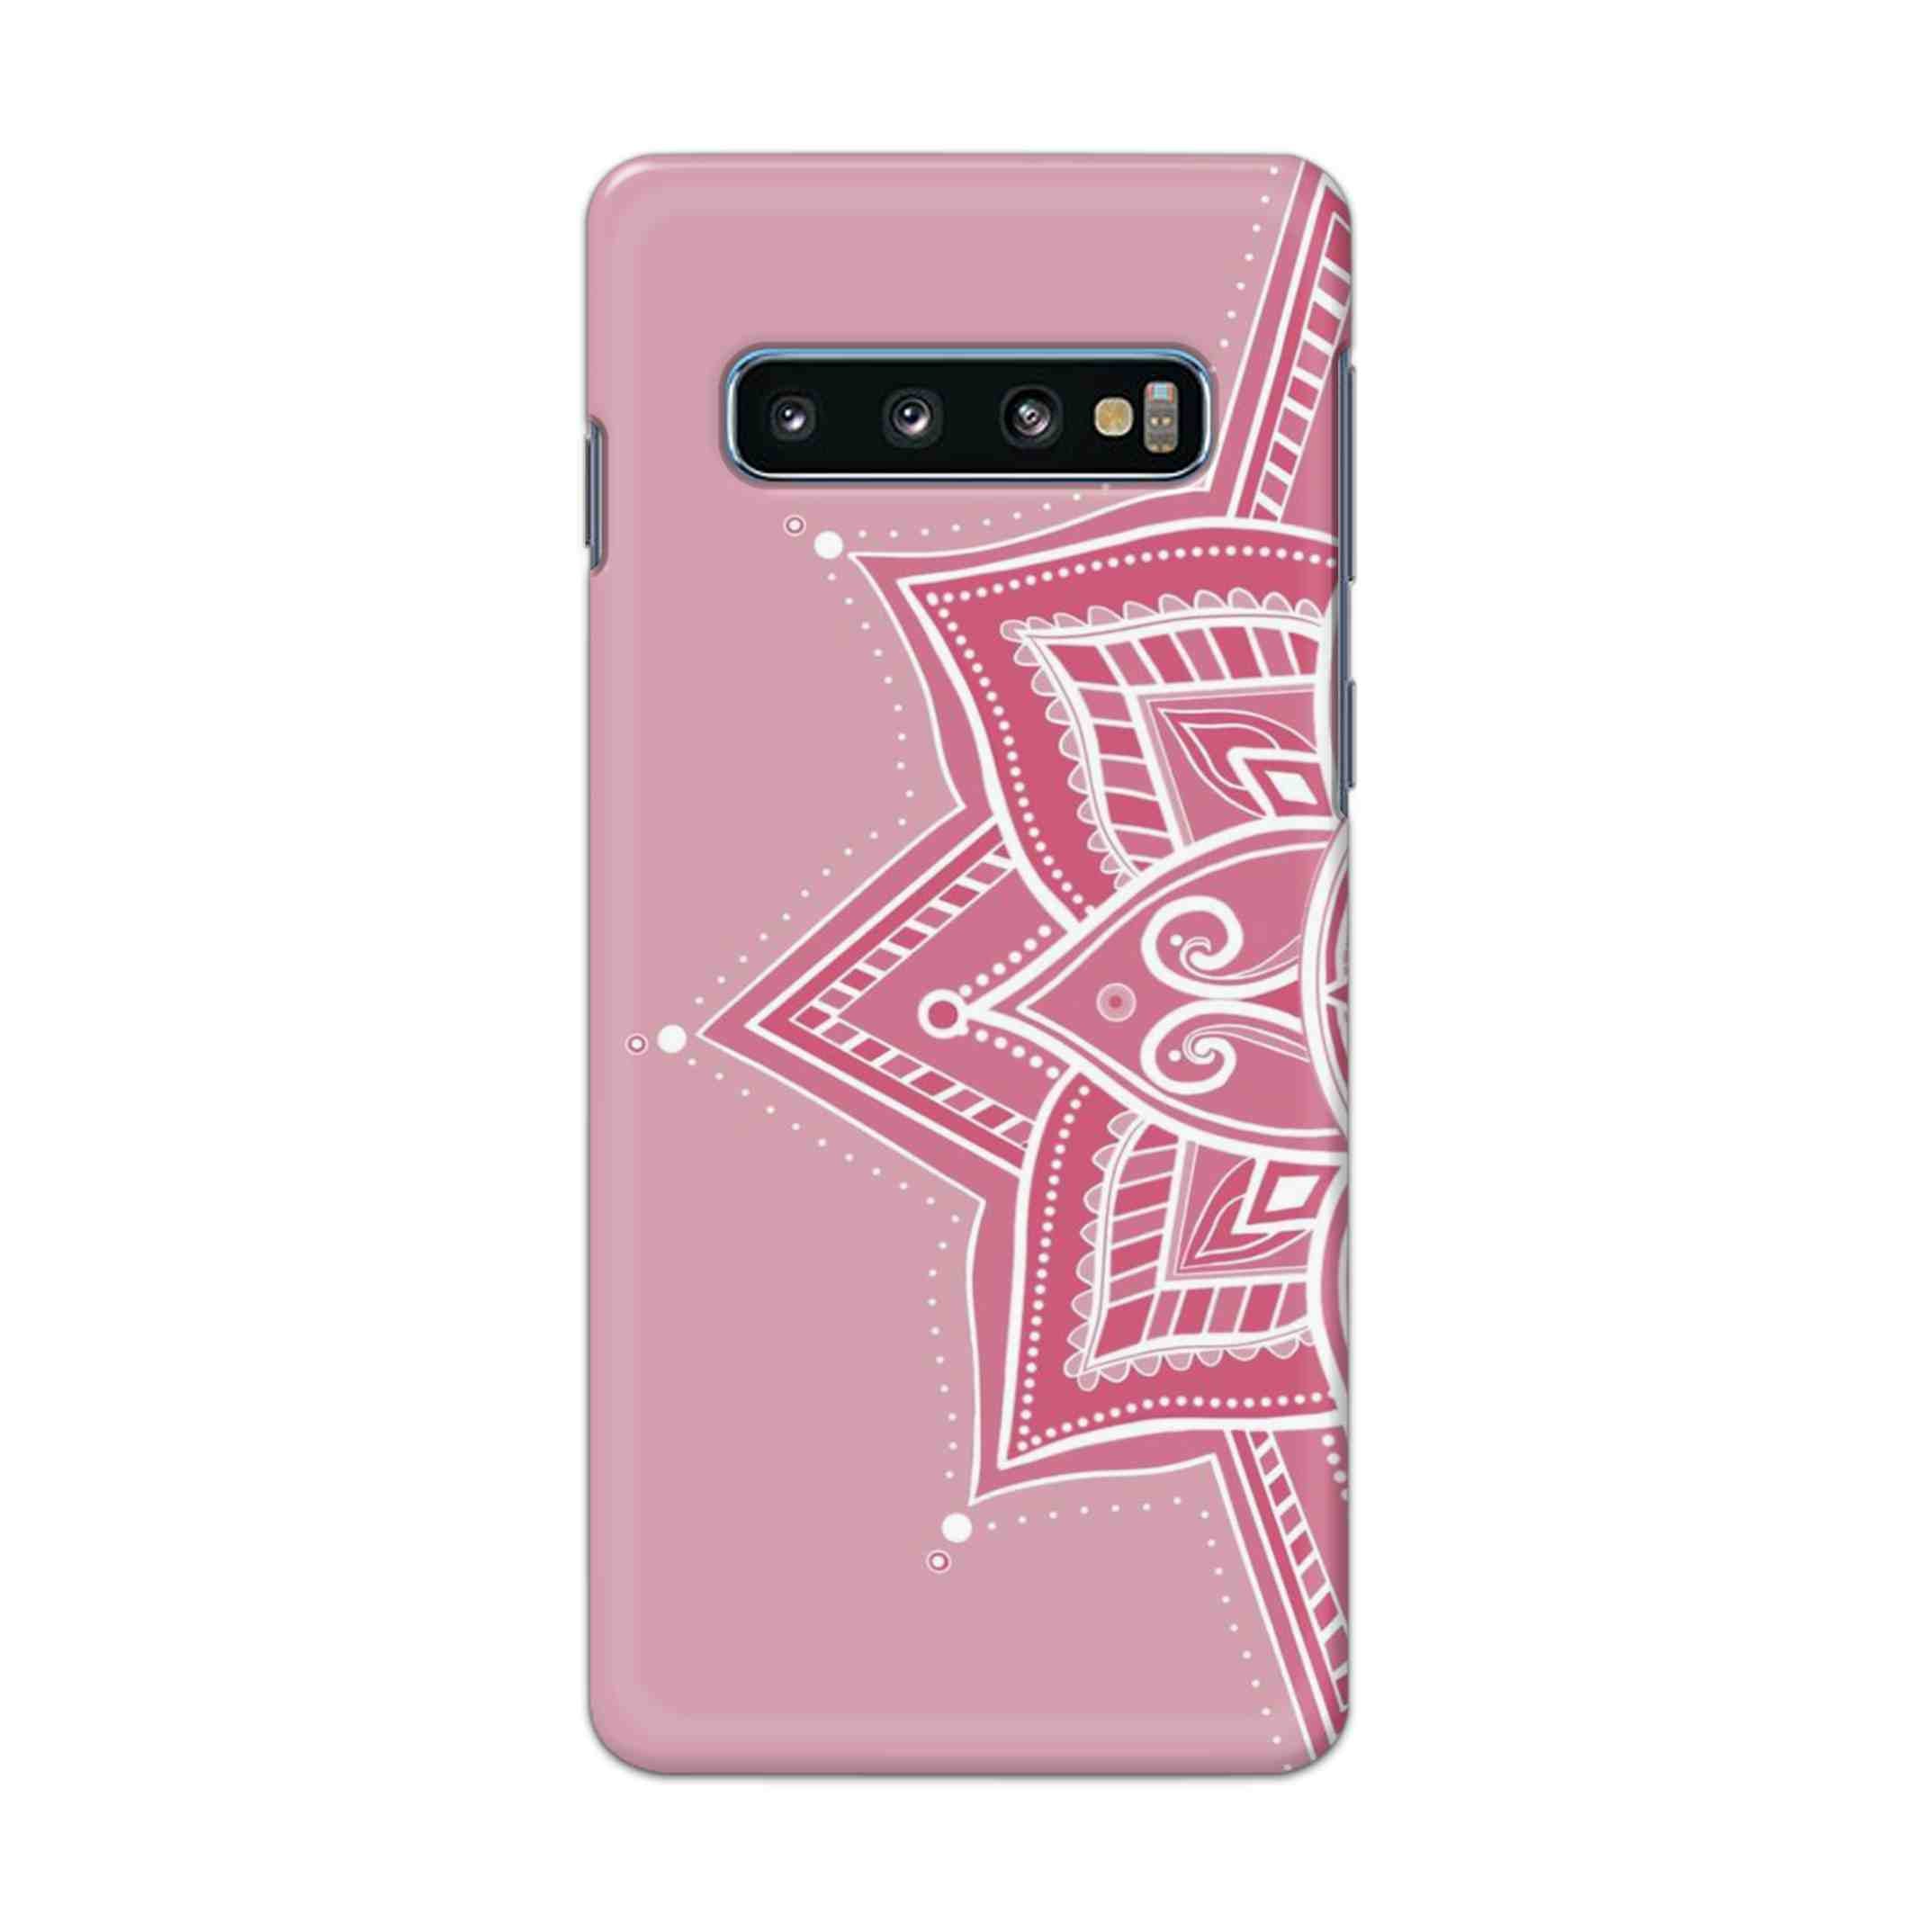 Buy Pink Rangoli Hard Back Mobile Phone Case Cover For Samsung Galaxy S10 Plus Online